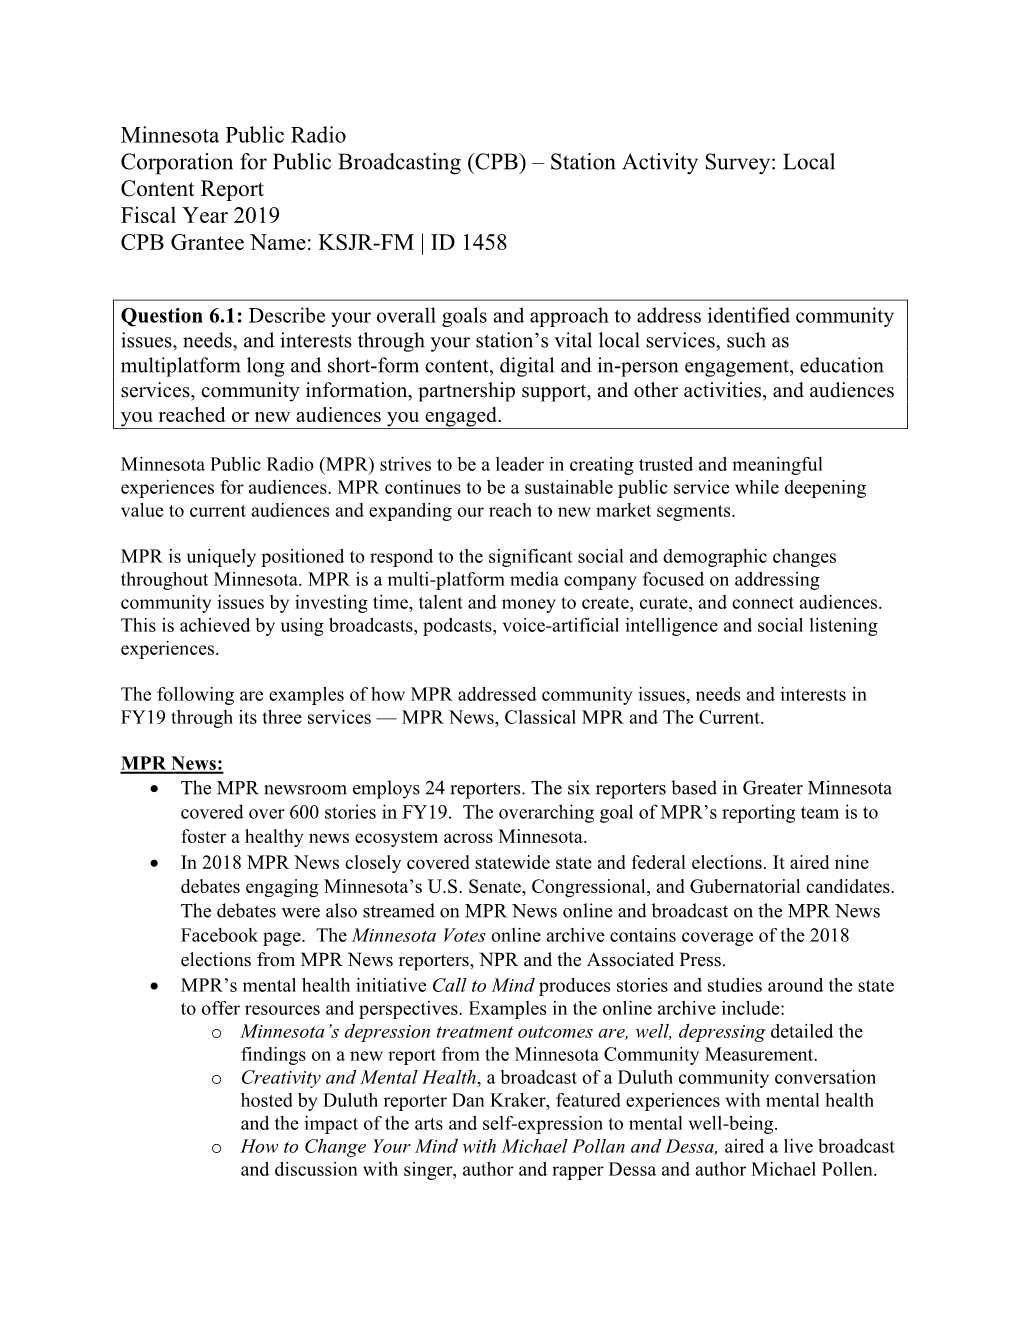 Minnesota Public Radio Corporation for Public Broadcasting (CPB) – Station Activity Survey: Local Content Report Fiscal Year 2019 CPB Grantee Name: KSJR-FM | ID 1458